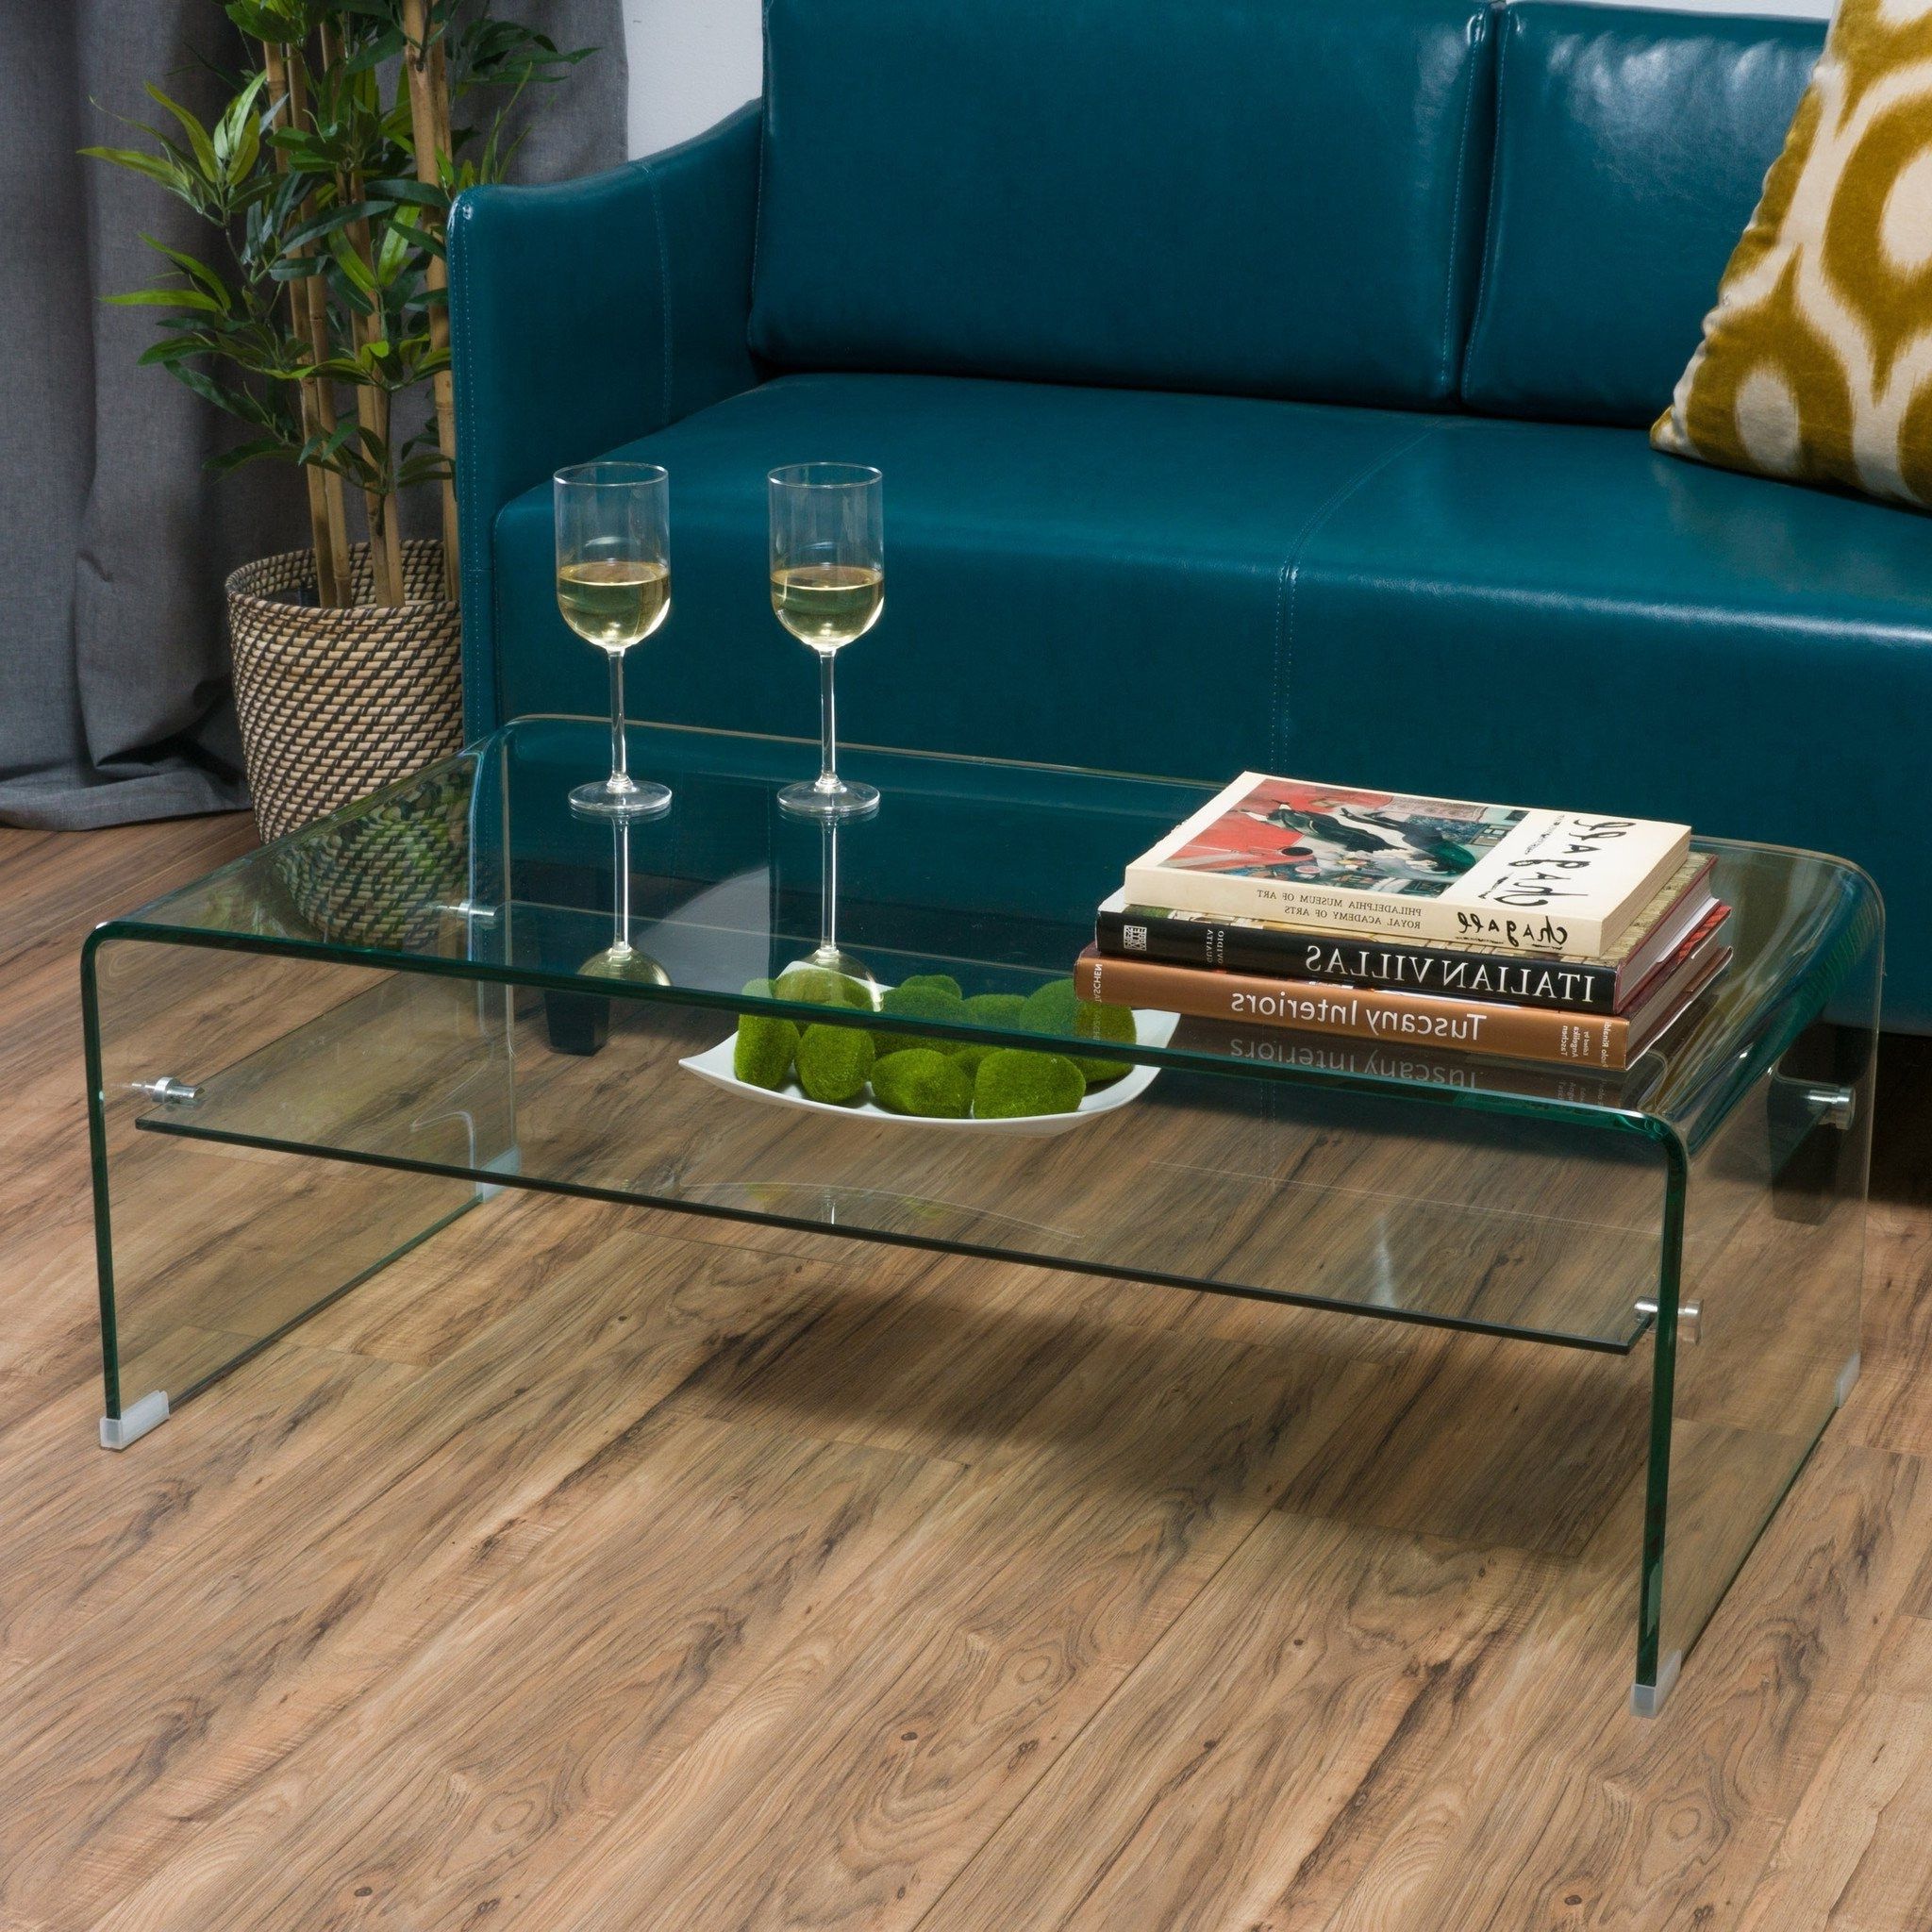 Fashionable Rectangular Glass Top Coffee Tables With Regard To Classon Glass Rectangle Coffee Table W/ Shelf In Coffee (Gallery 12 of 20)